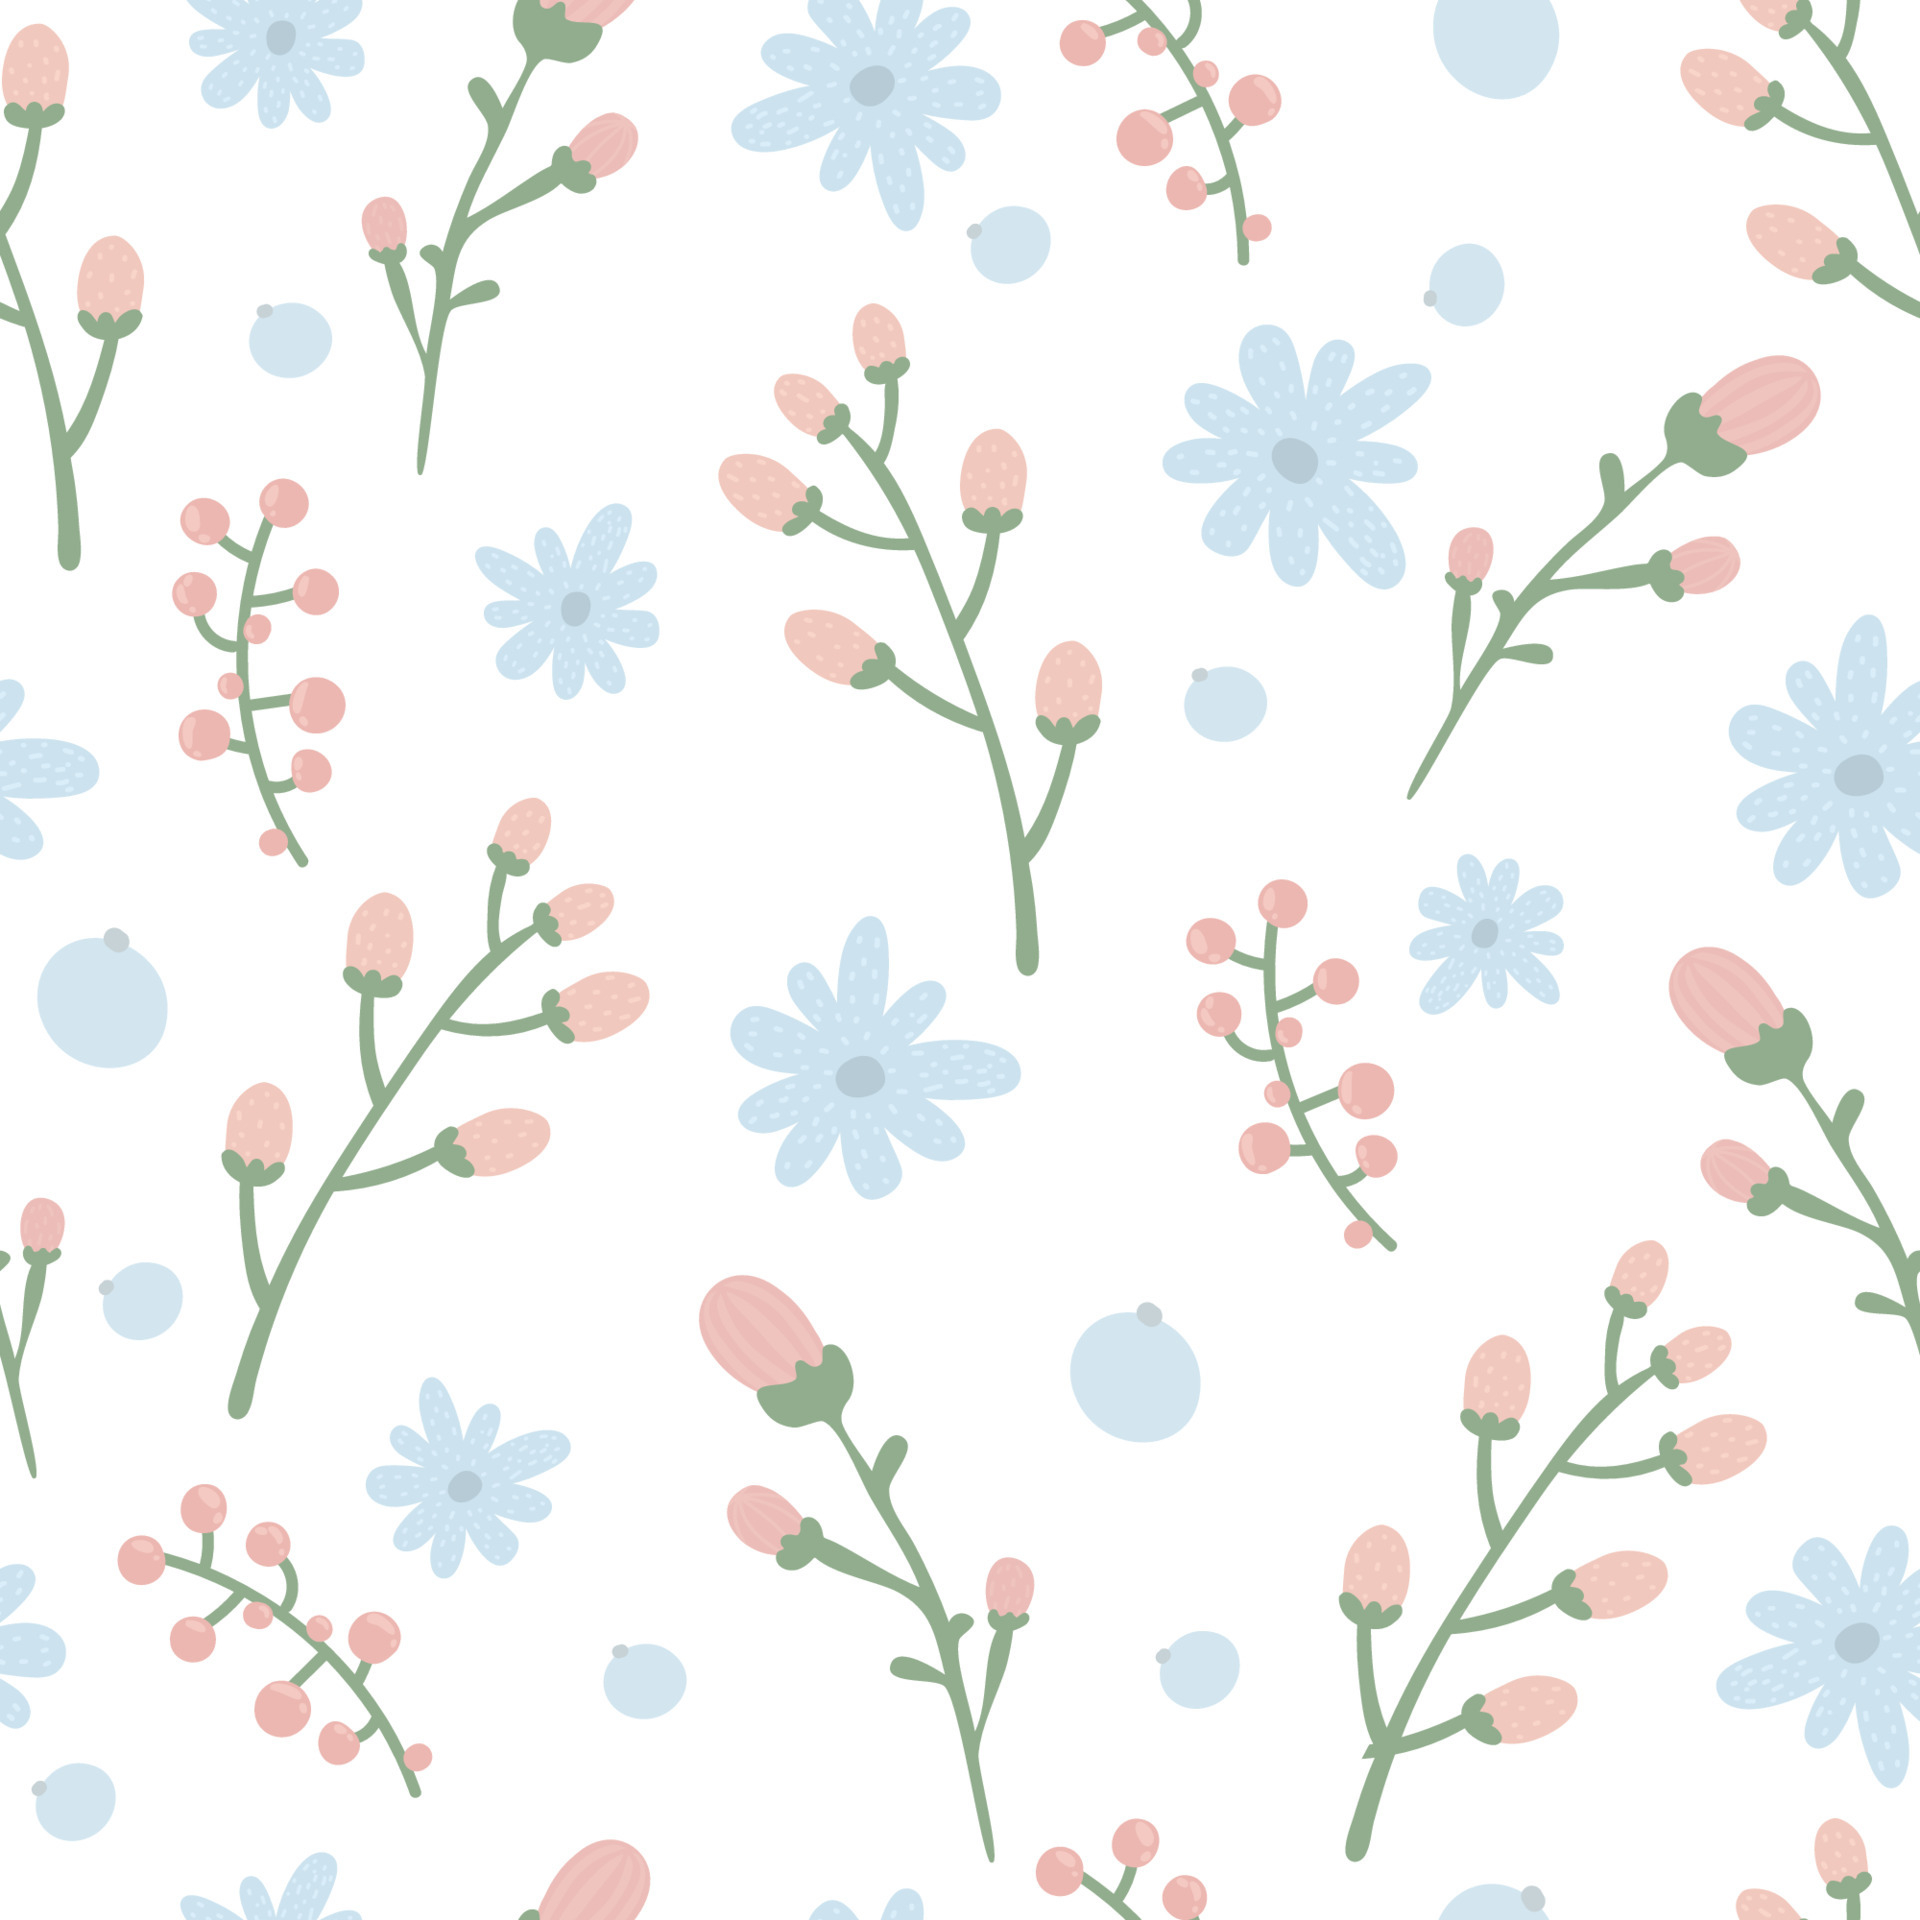 1920x1920 Floral pattern. Pretty flowers on white background. Printing with small pink flowers. Ditsy print. Cute elegant flower template for fashionable printers 7076292 Vector Art